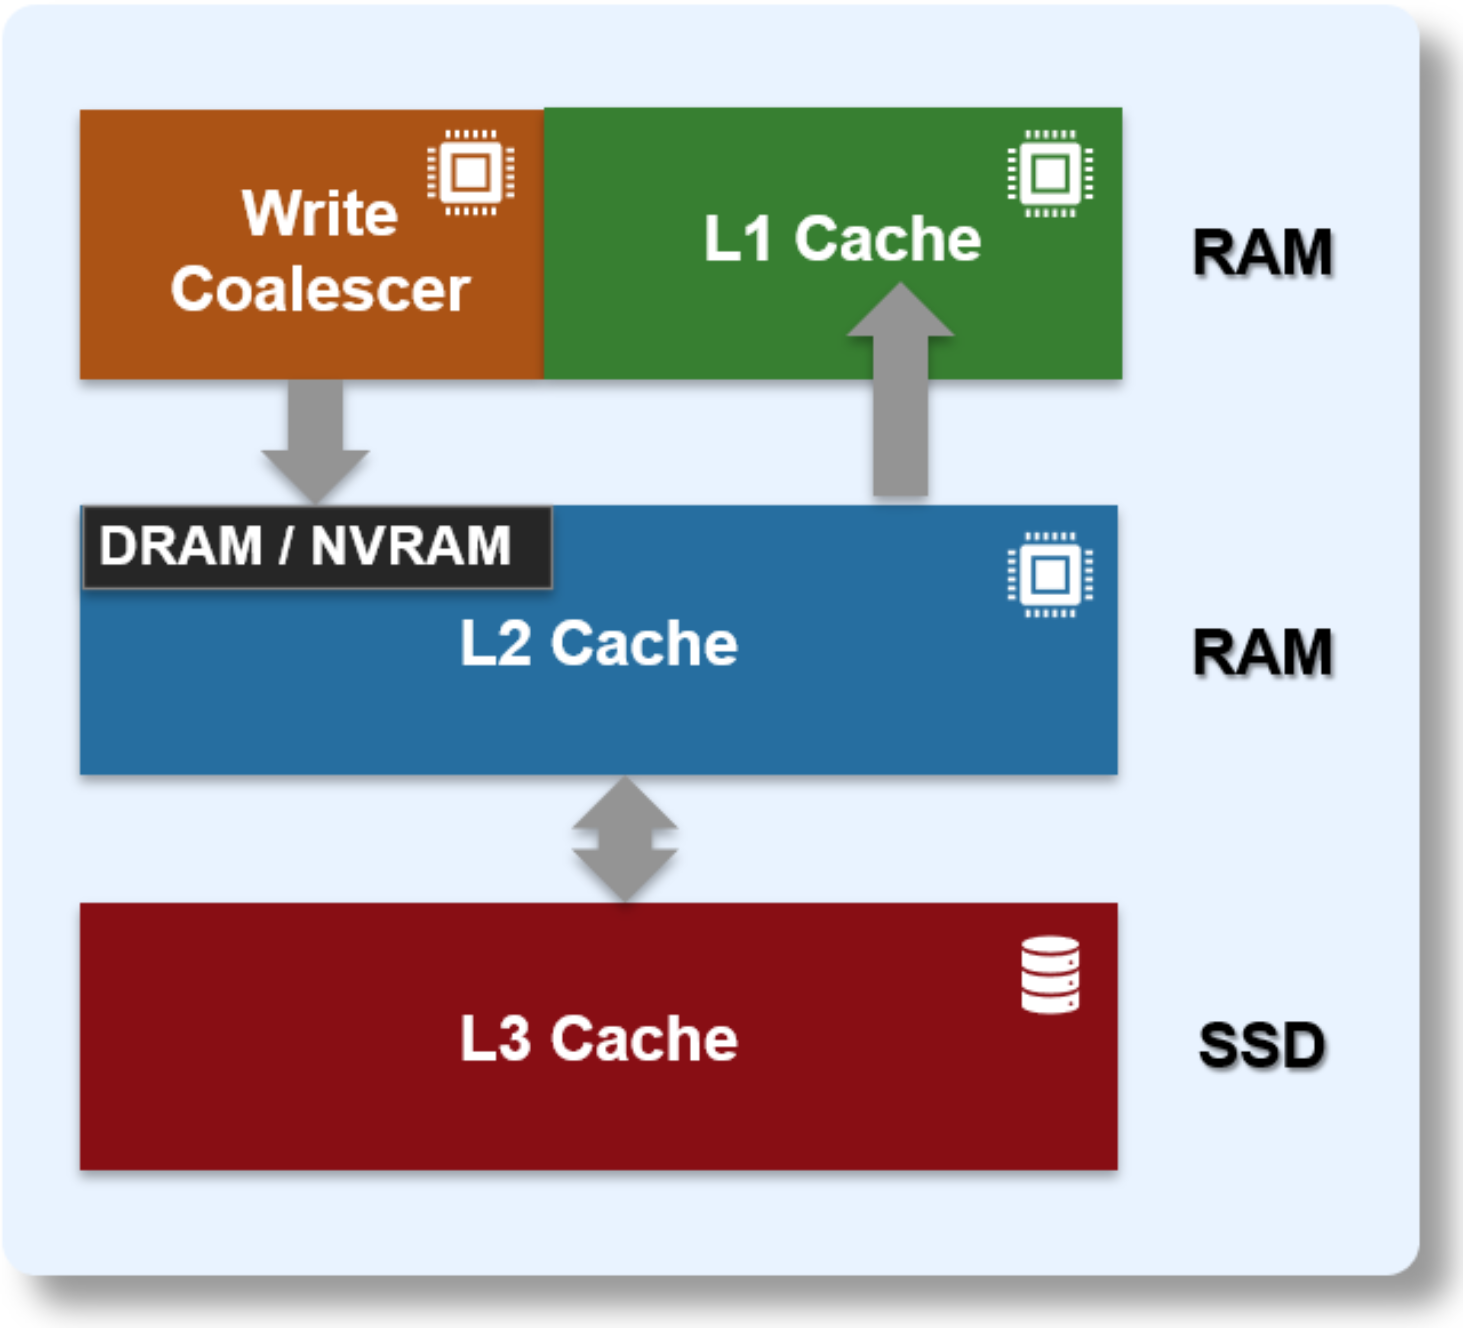 Graphic depicting the three levels of the OneFS caching hierarchy - RAM based L1 and L2 cache, and SSD-based L3 cache.